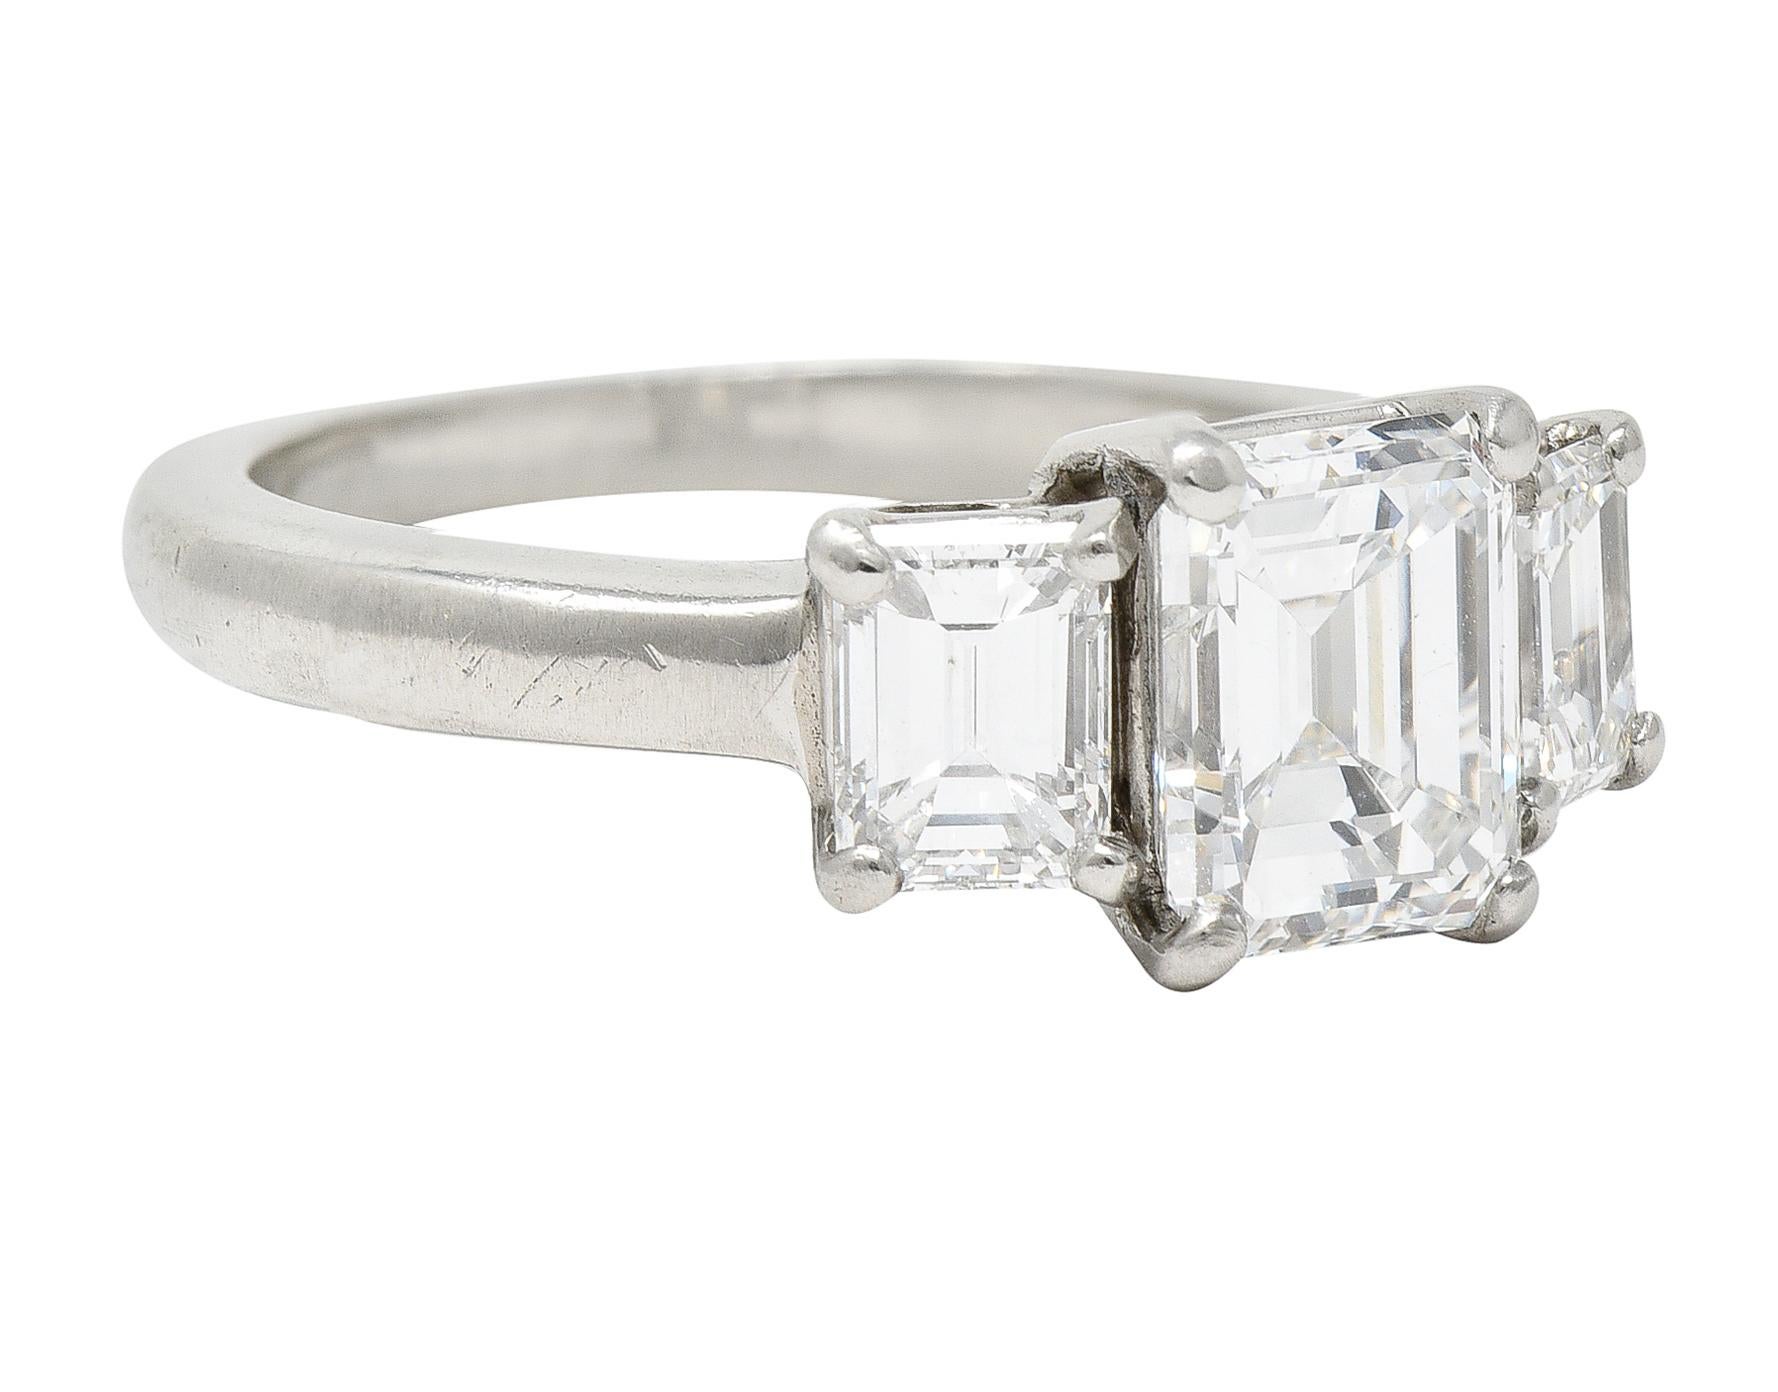 Featuring three basket set emerald cut diamonds. Center weighs 1.53 carats with E color and VS2 clarity. Remaining weigh collectively approximately 0.98 carat with E/F color and VS clarity. Stamped for platinum. With maker's mark. Circa: 1950s. Ring